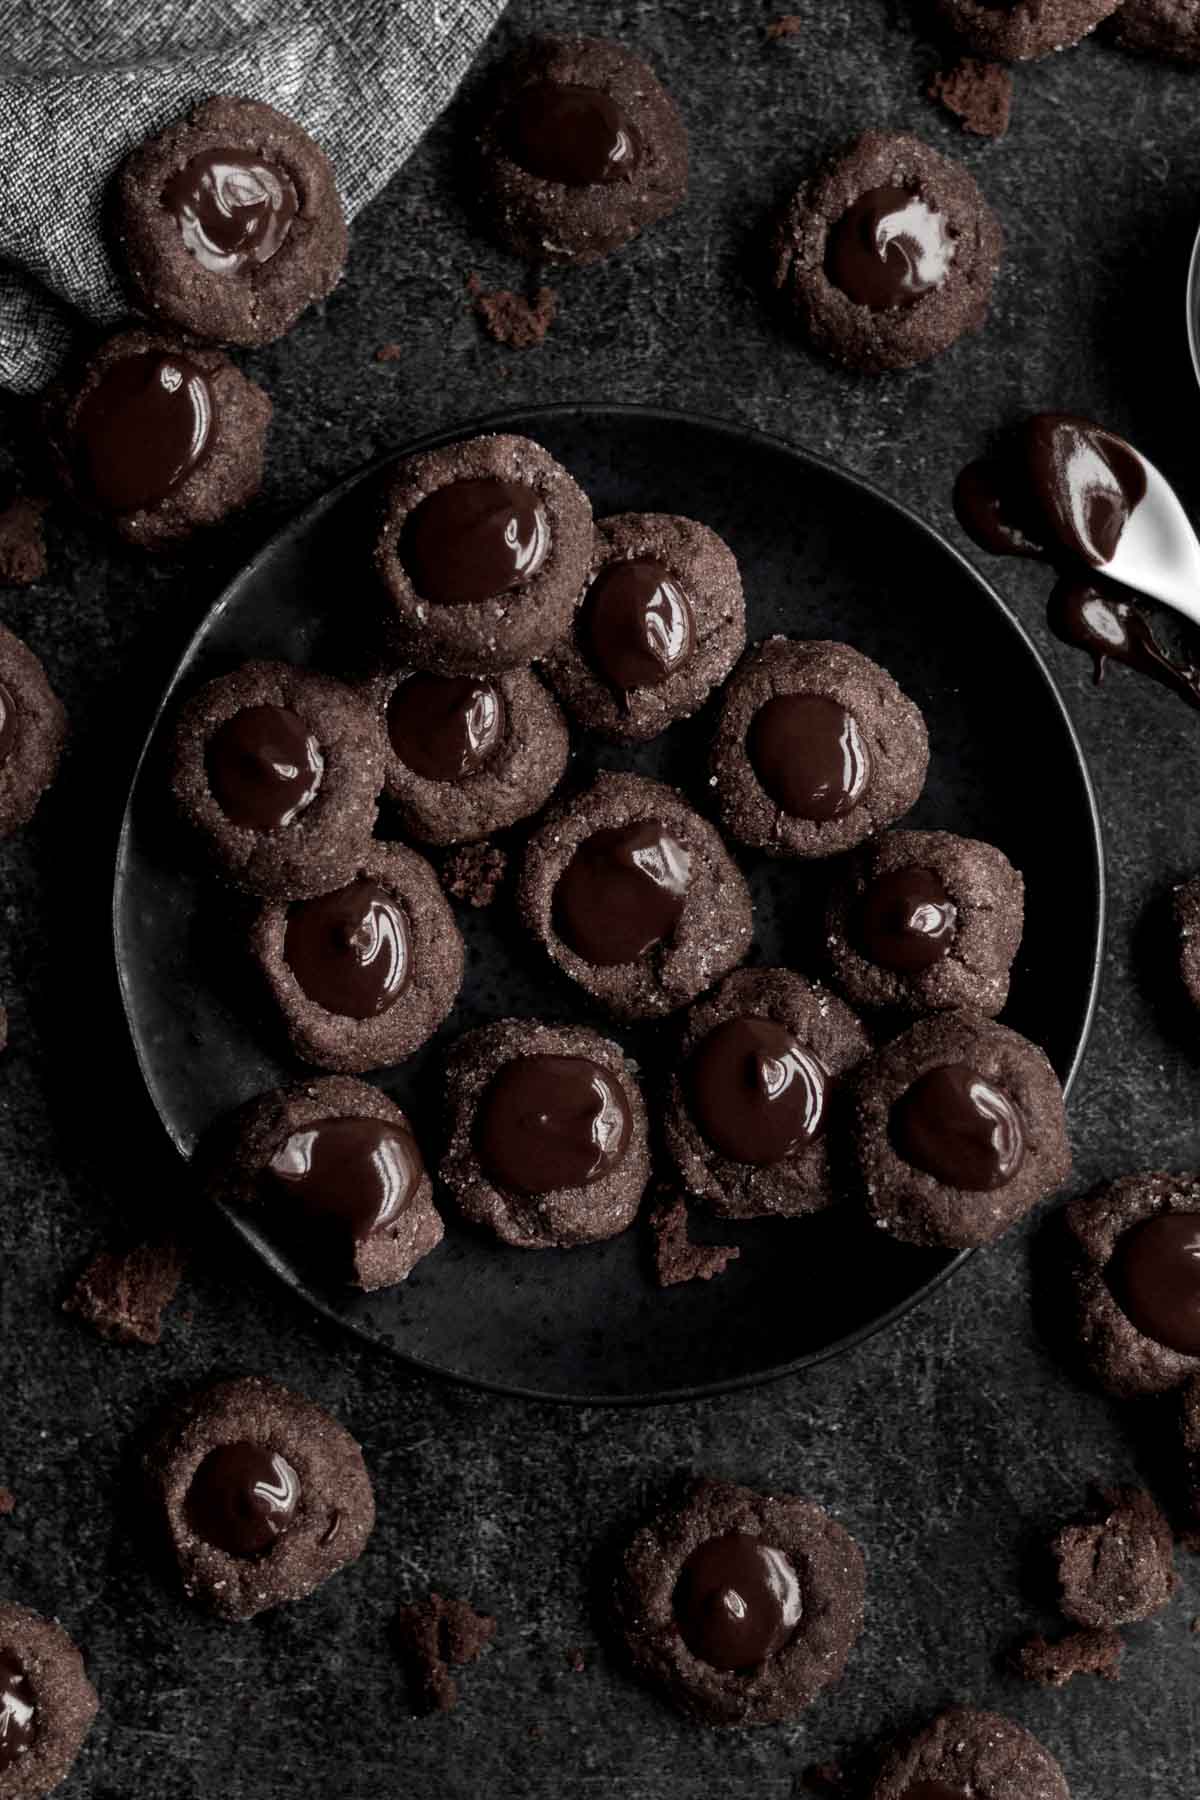 Chocolate Thumbprint Cookies arranged on a plate with chocolate ganache.